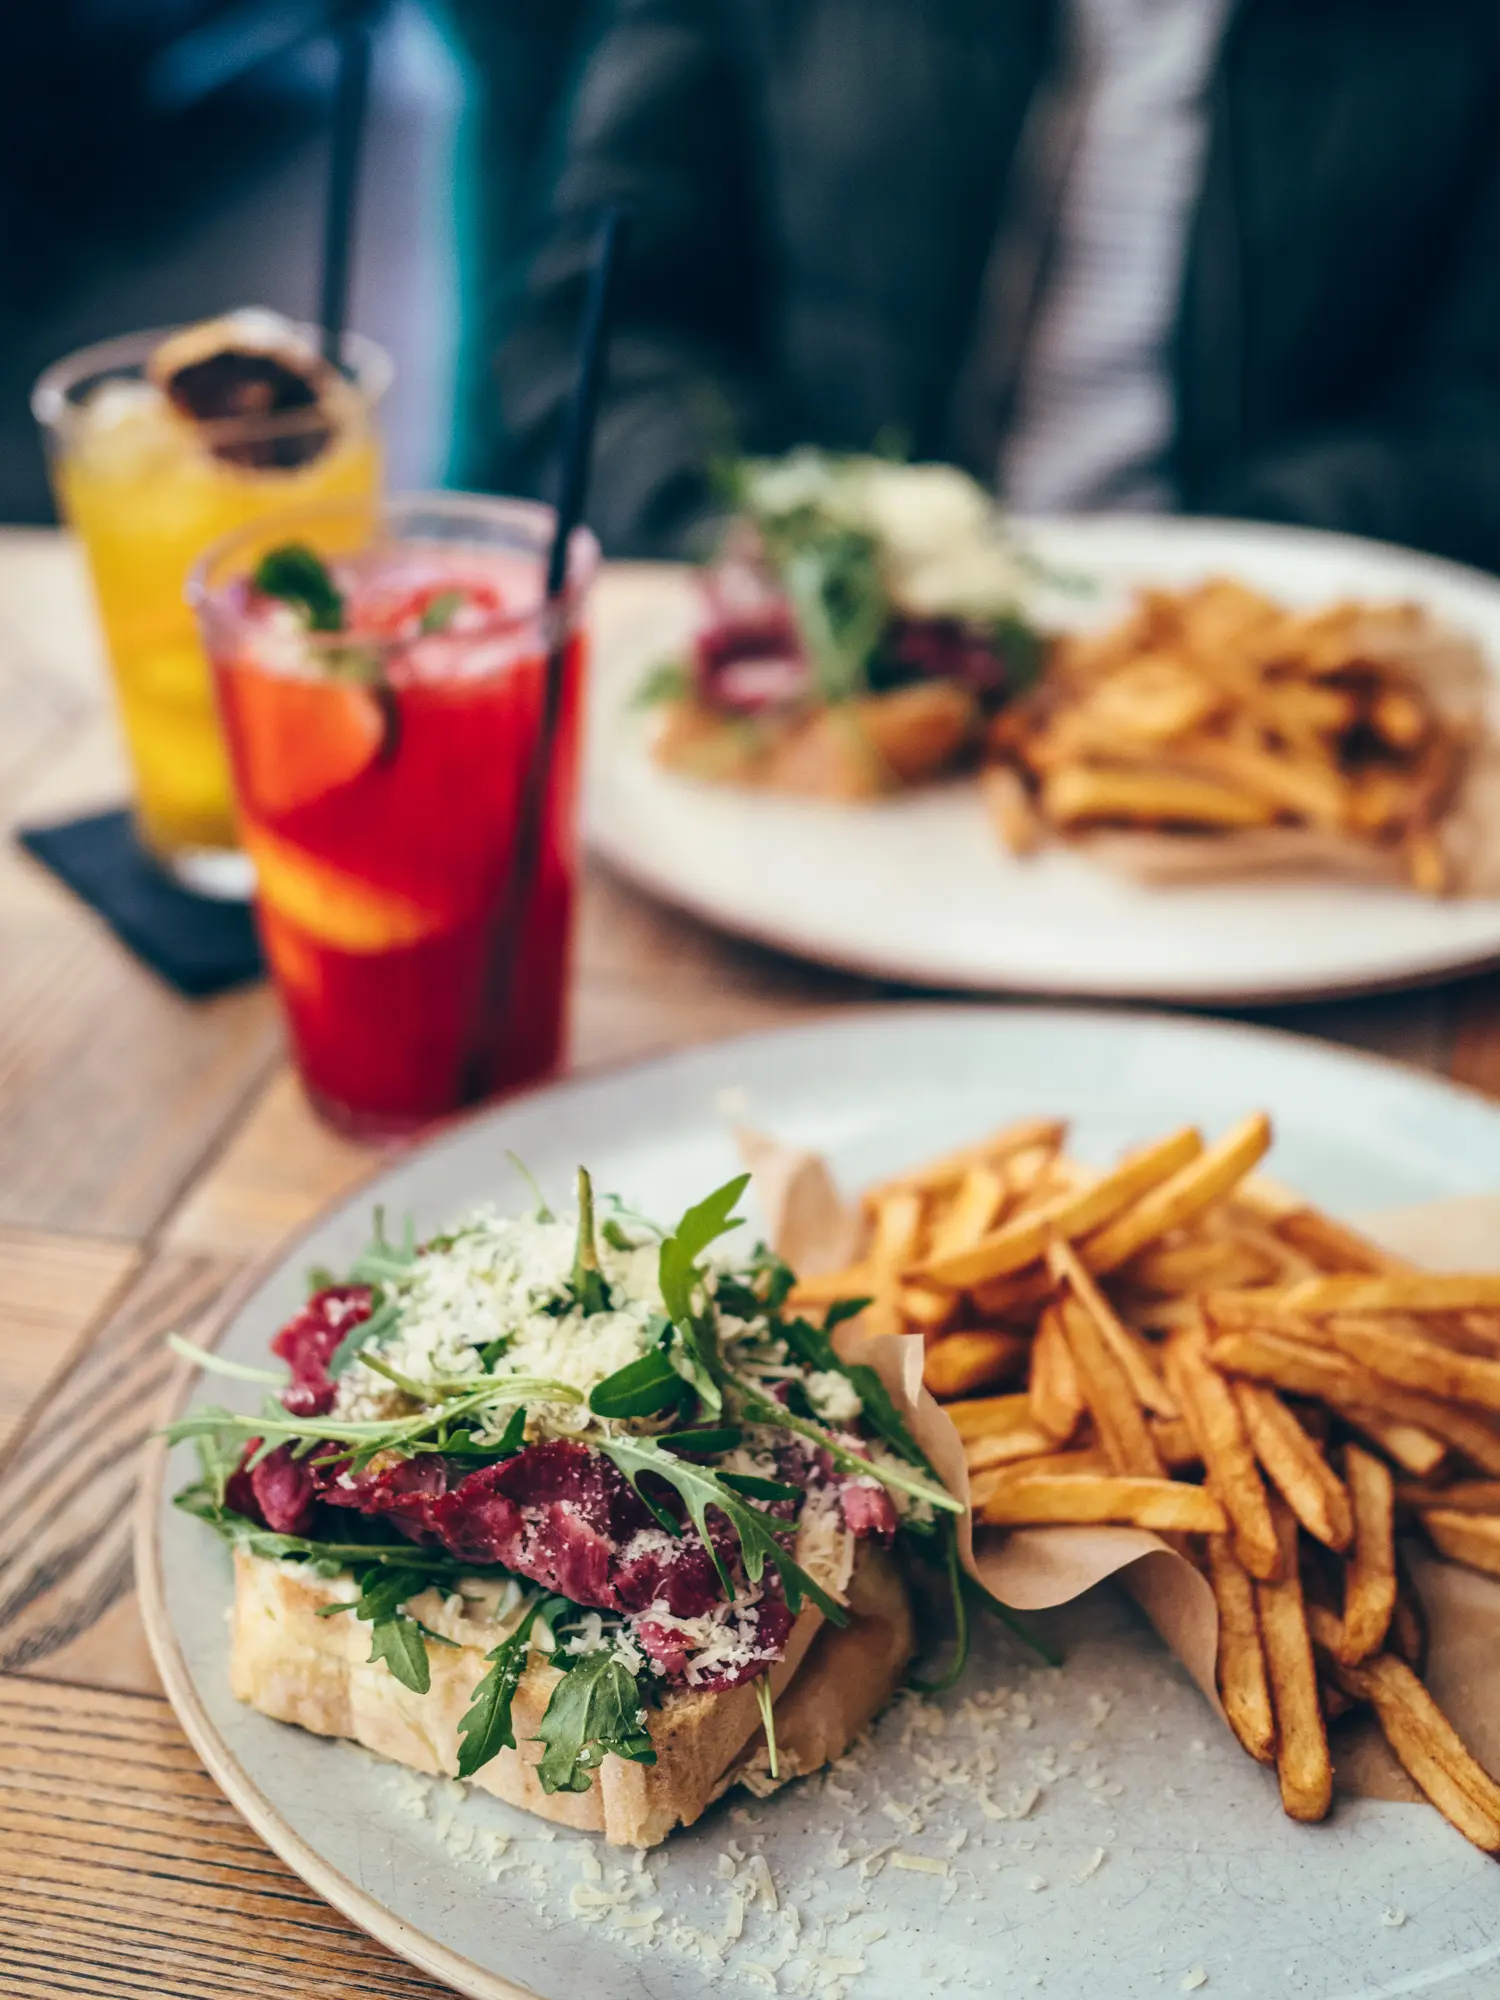 Toast with roast beef, arugula and parmesan on a grey plate with skinny fries, red and yellow lemonades in the background at Nova Resto Bar, one of the best restaurants in Krakow.